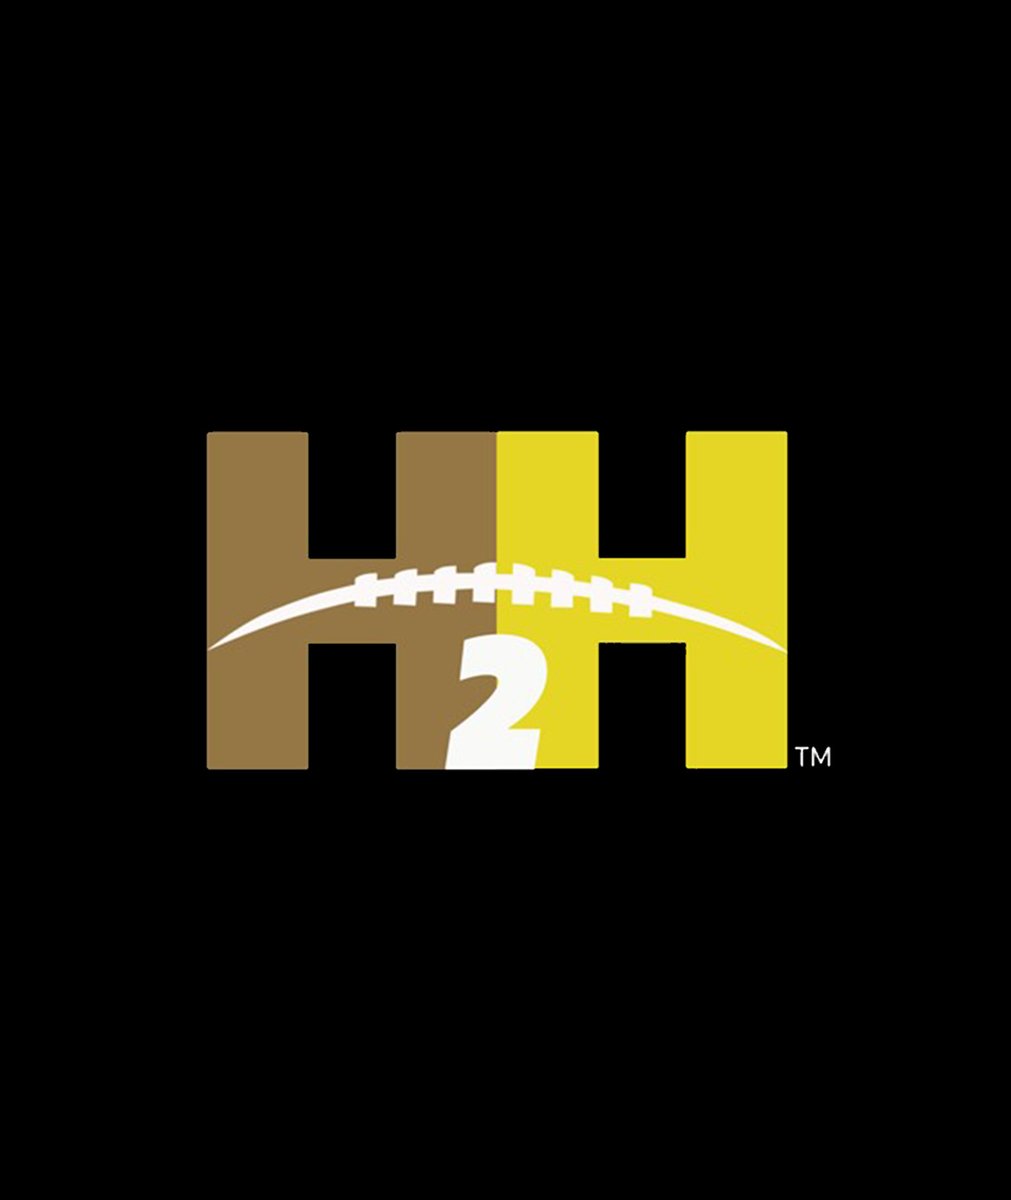 During the last 125 years, over 5 million men have played college football. A select few have achieved a rare dual accomplishment in professional sports – winning the Heisman Trophy and being enshrined into the Pro Football Hall of Fame. 

Visit h2hlegends.com for more!